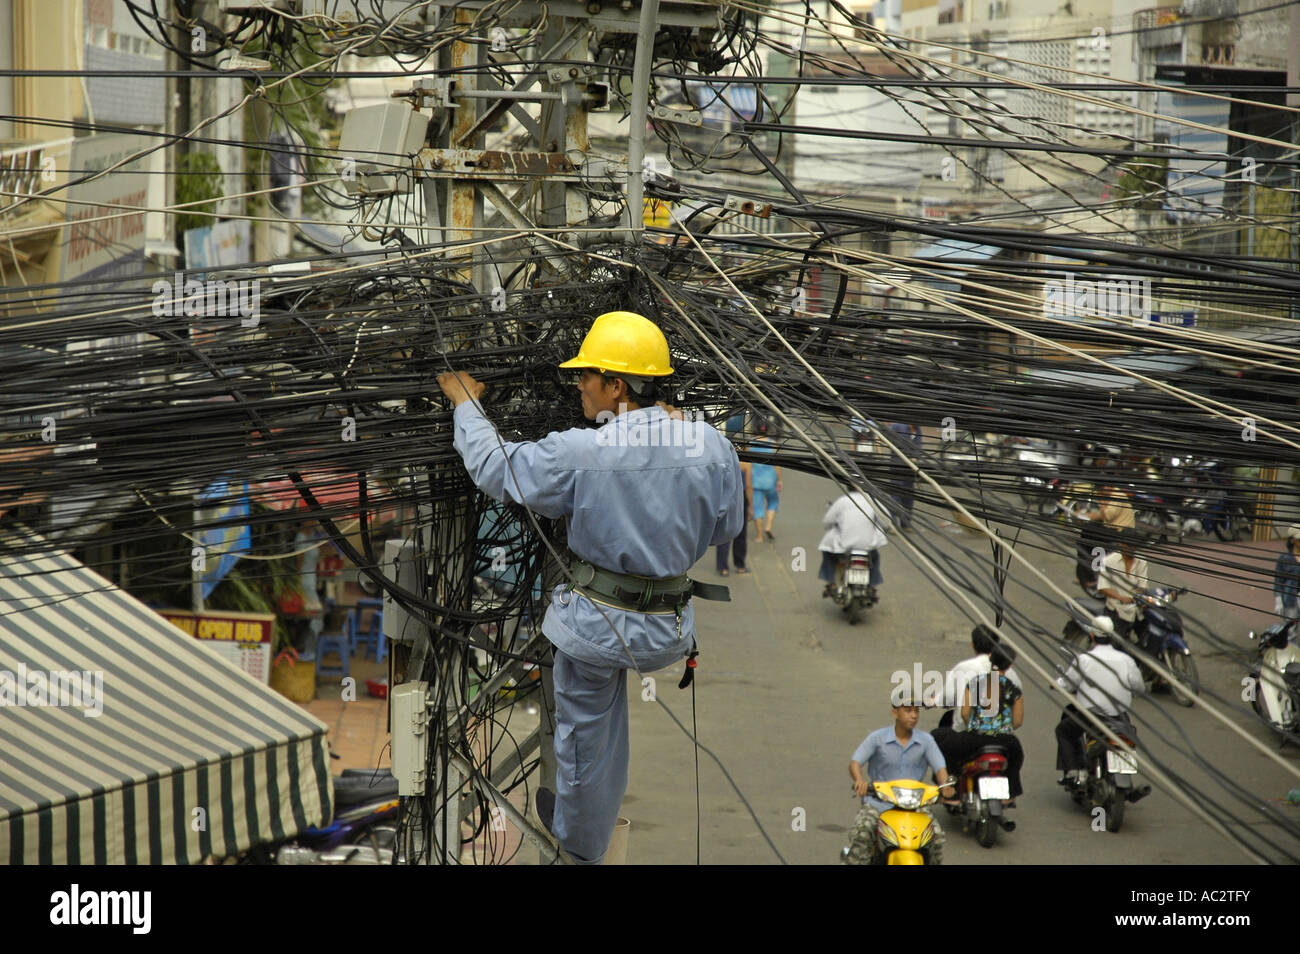 A contractor repairs a jumble of wires in Pham Ngu Lao district in Ho Chi Minh City, Vietnam. Stock Photo